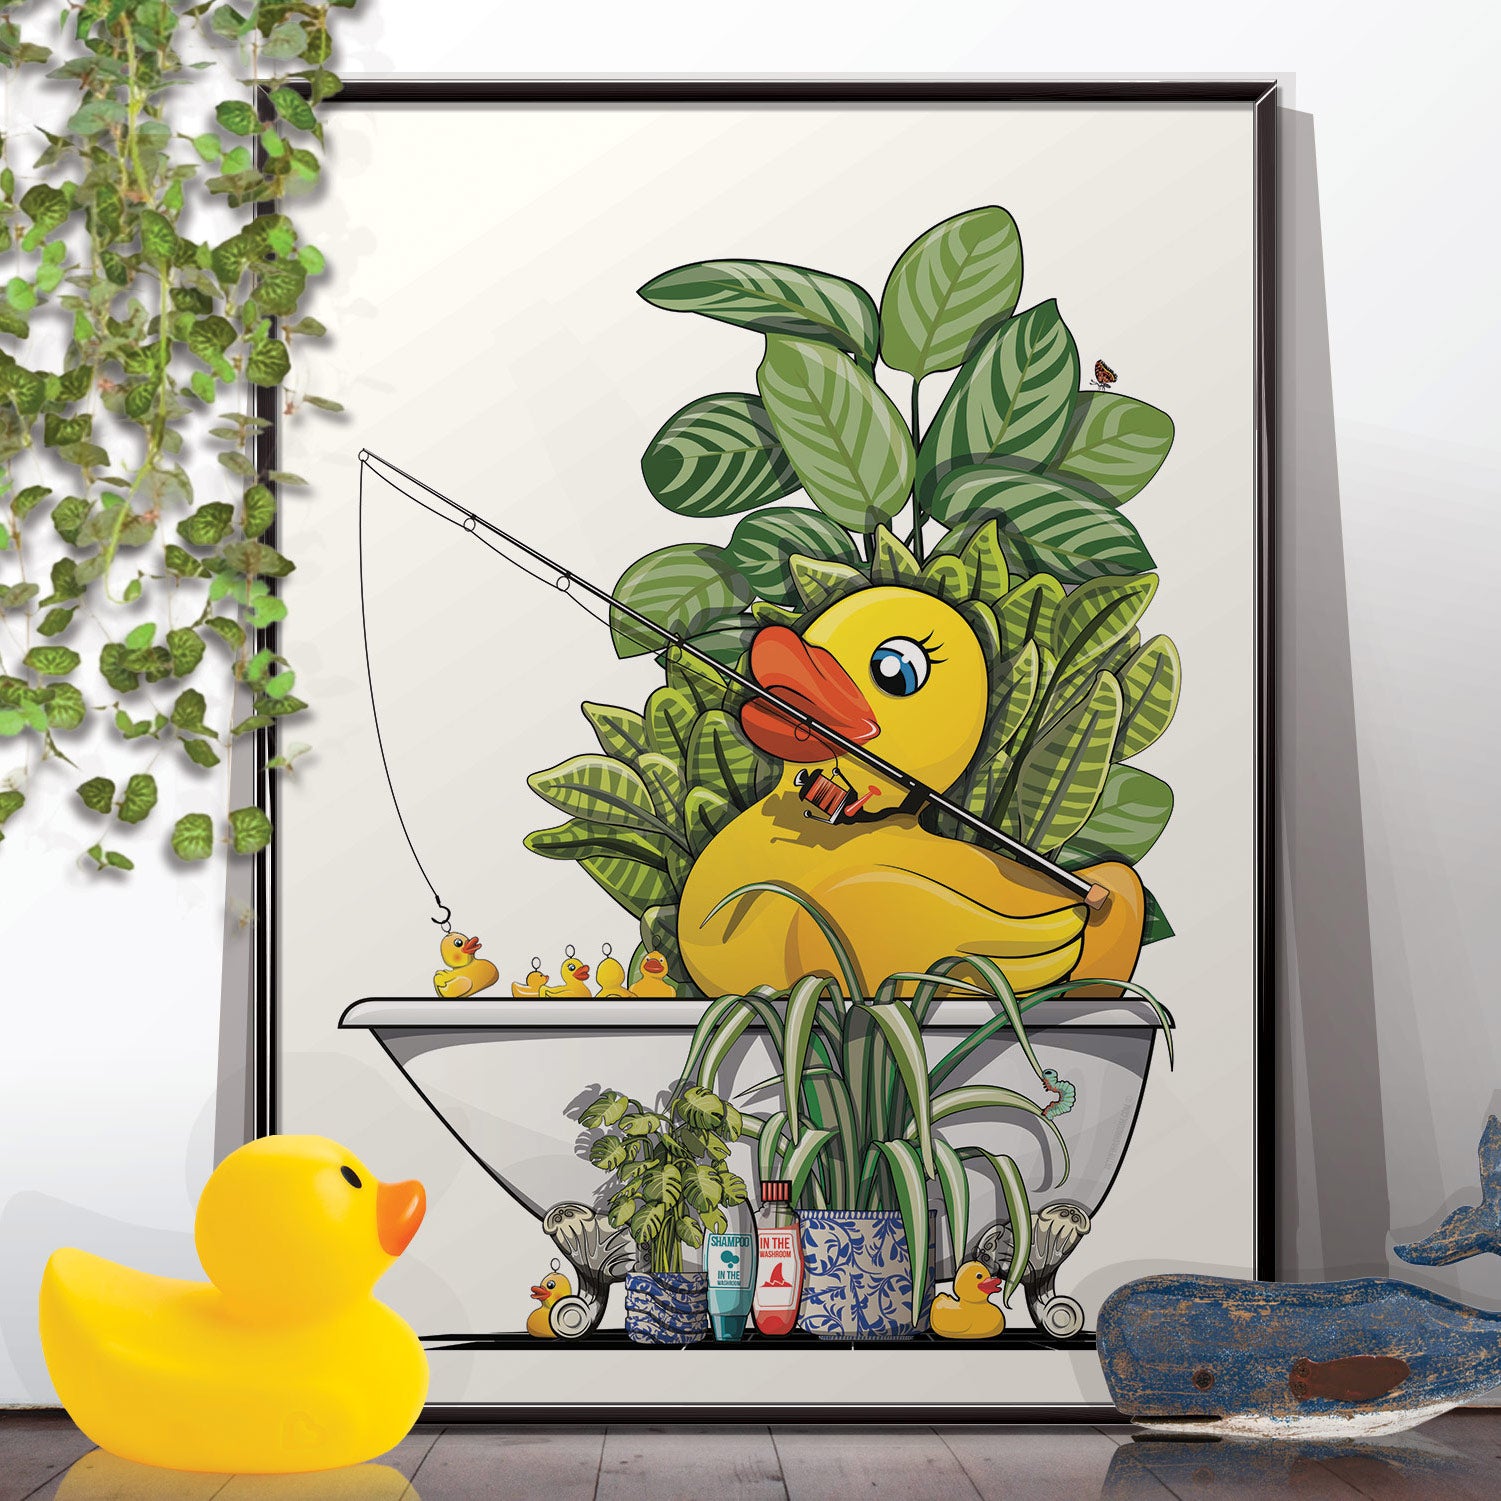 Rubber Duck, duck fishing in the bath, Bathroom, funny poster